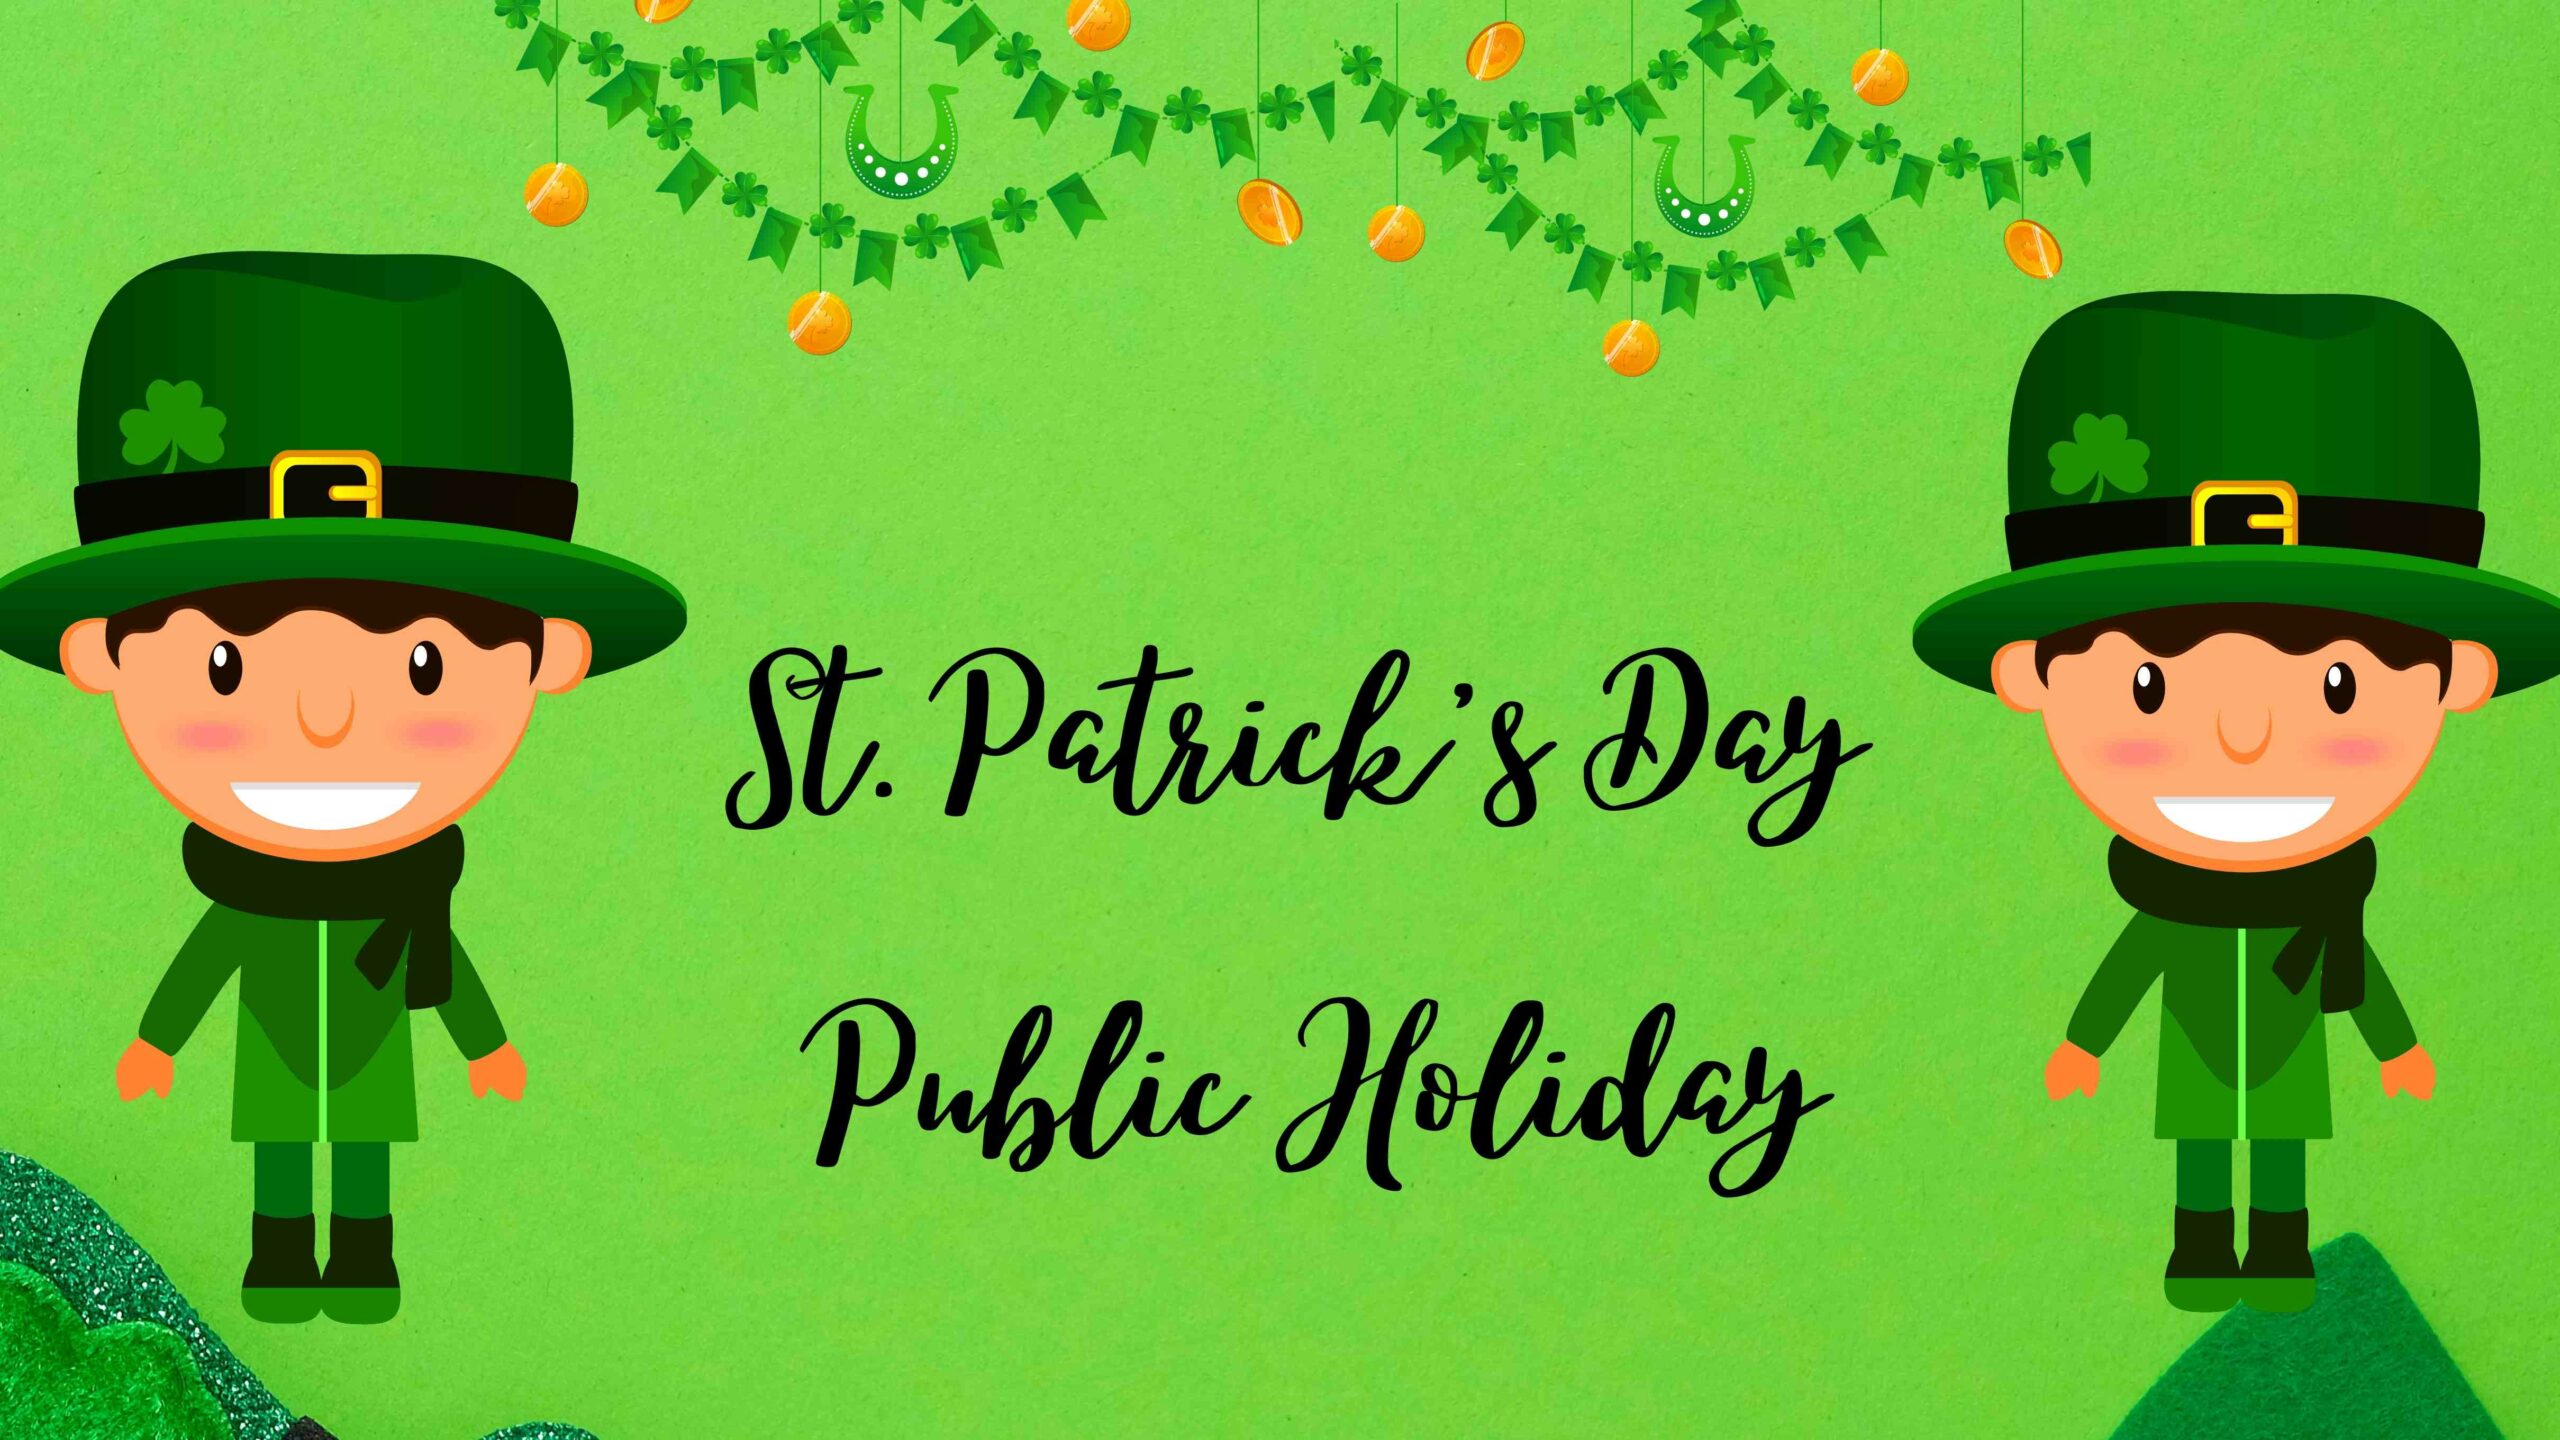 Happy St. Patrick's Day USA 2022 wallpaper and images (1)